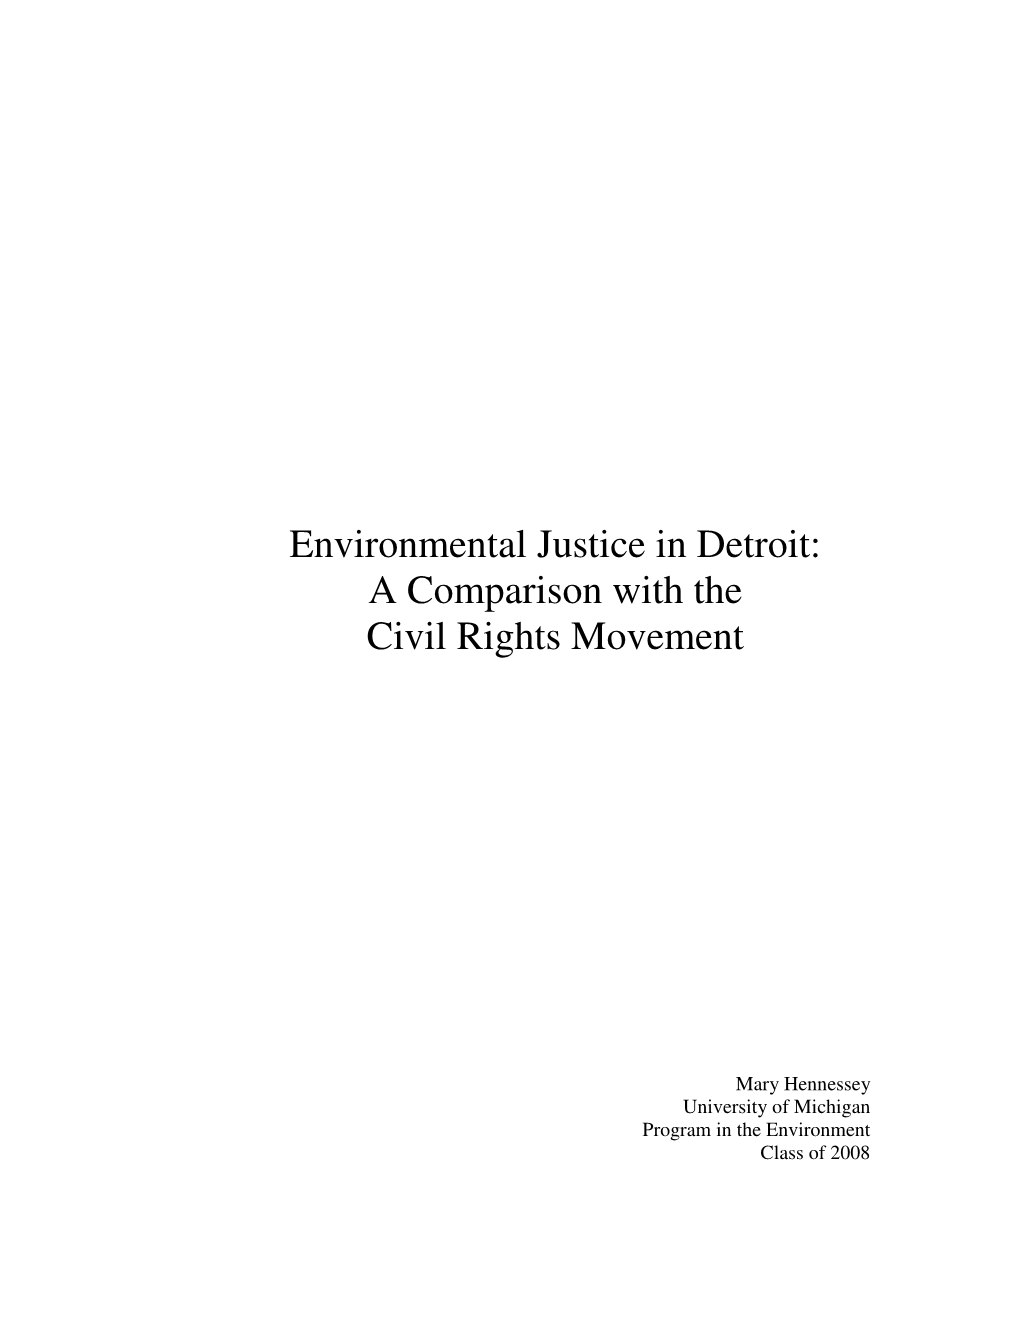 Environmental Justice in Detroit: a Comparison with the Civil Rights Movement